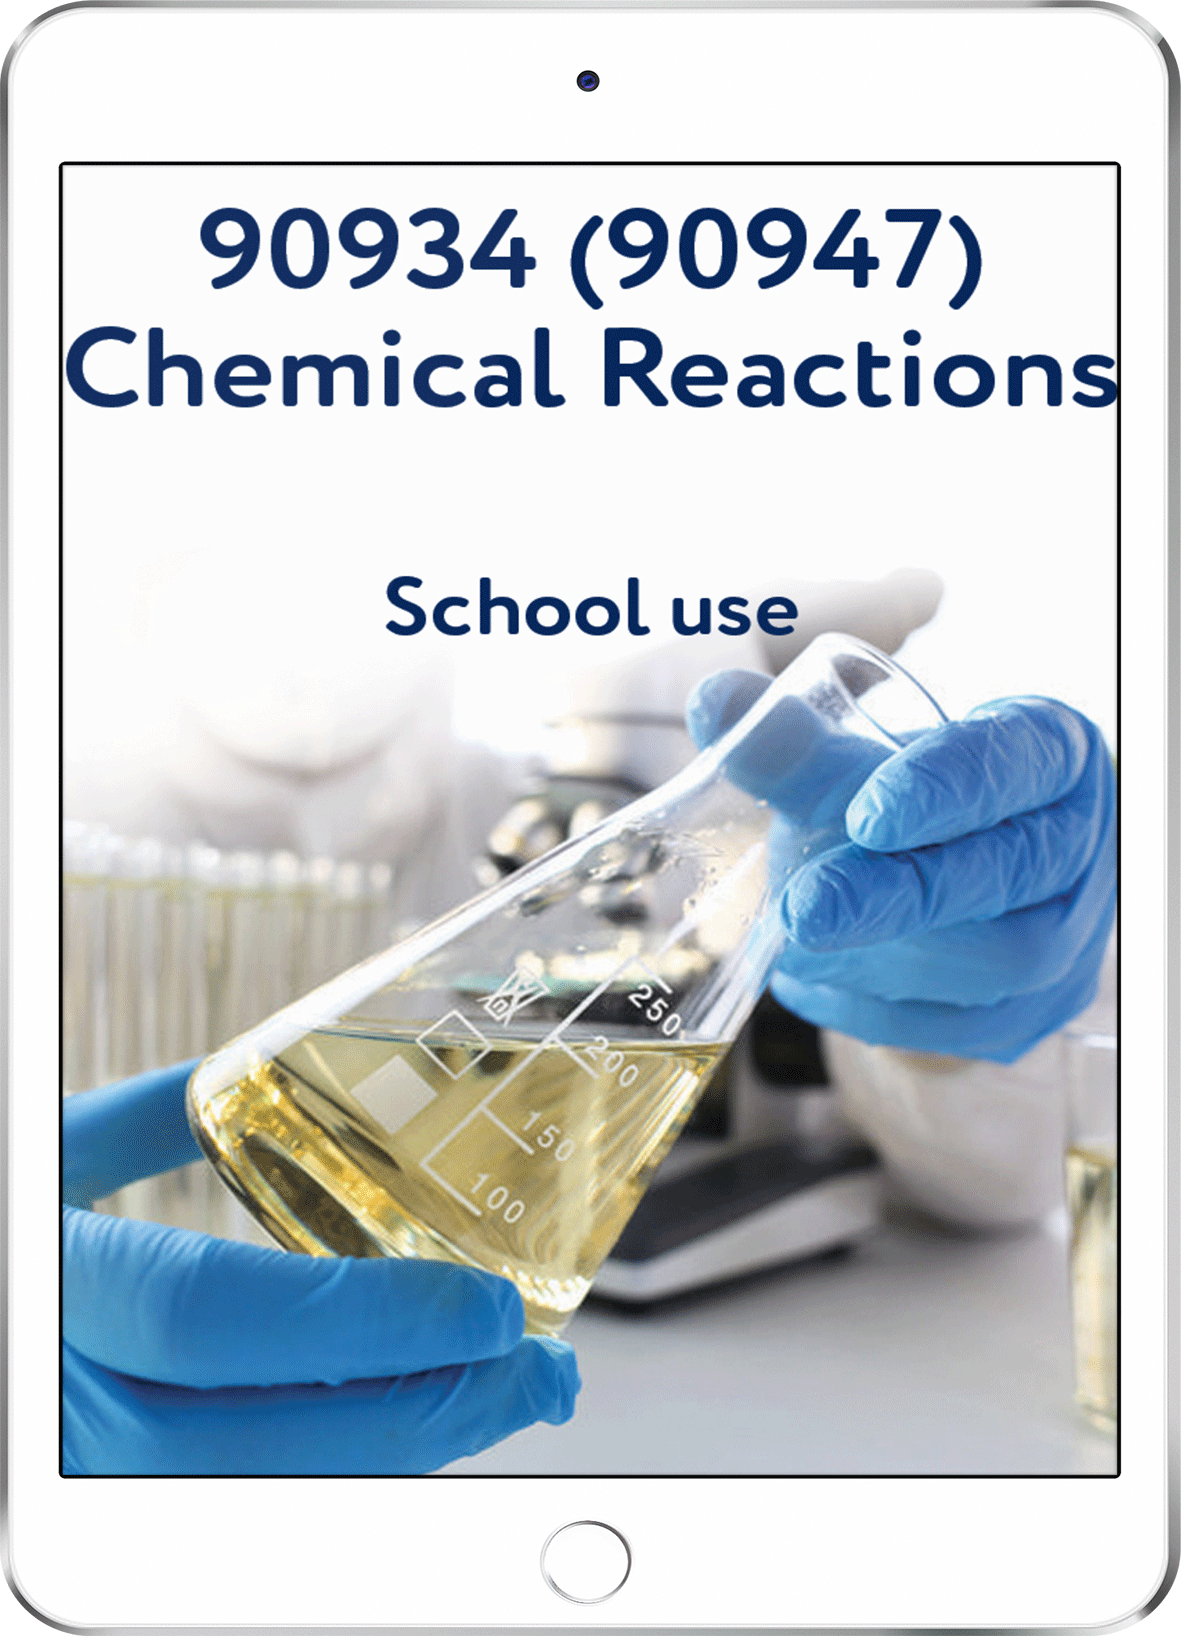 90934 (90947) Chemical Reactions - School Use